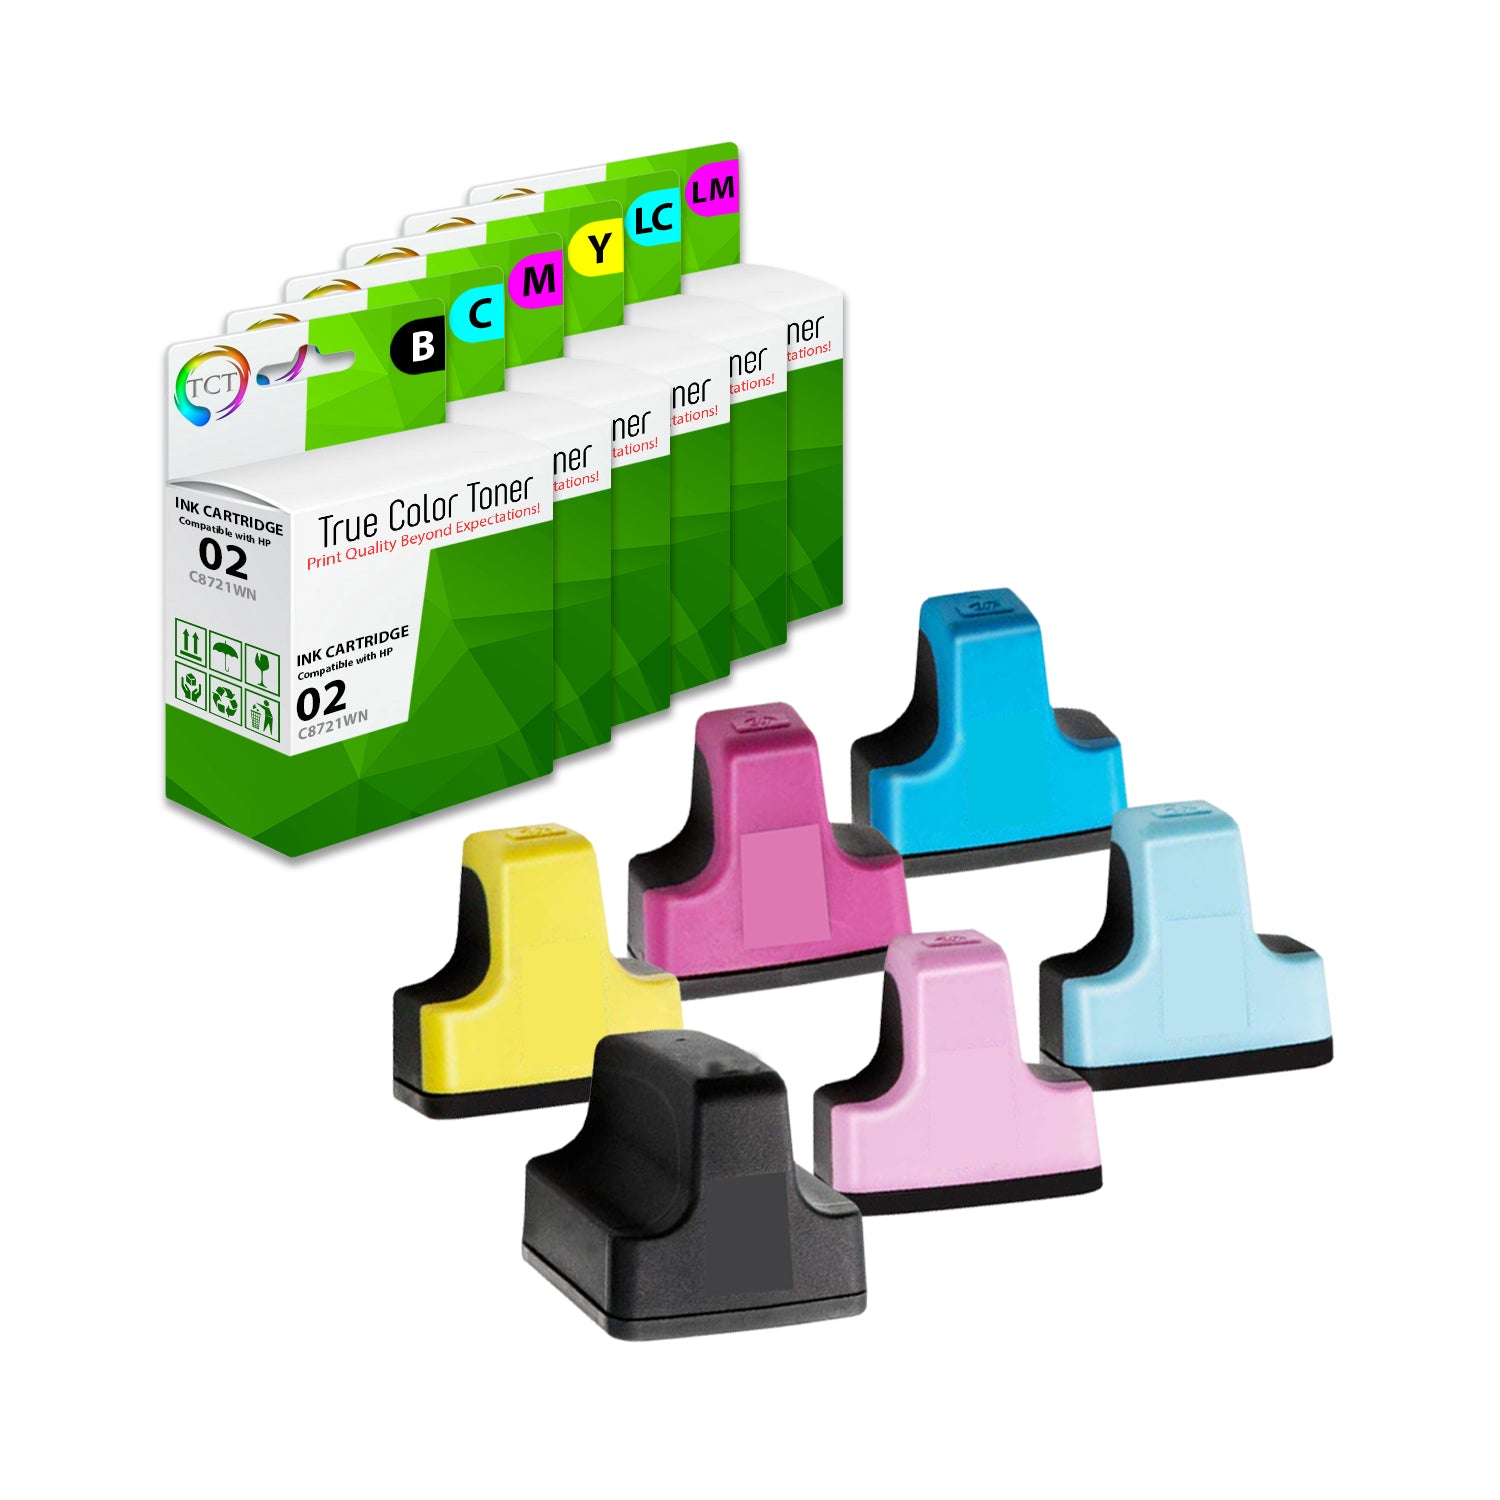 TCT Compatible Ink Cartridge Replacement for the HP 02 Series - 6 Pack (B, C, M, Y, LC, LM)